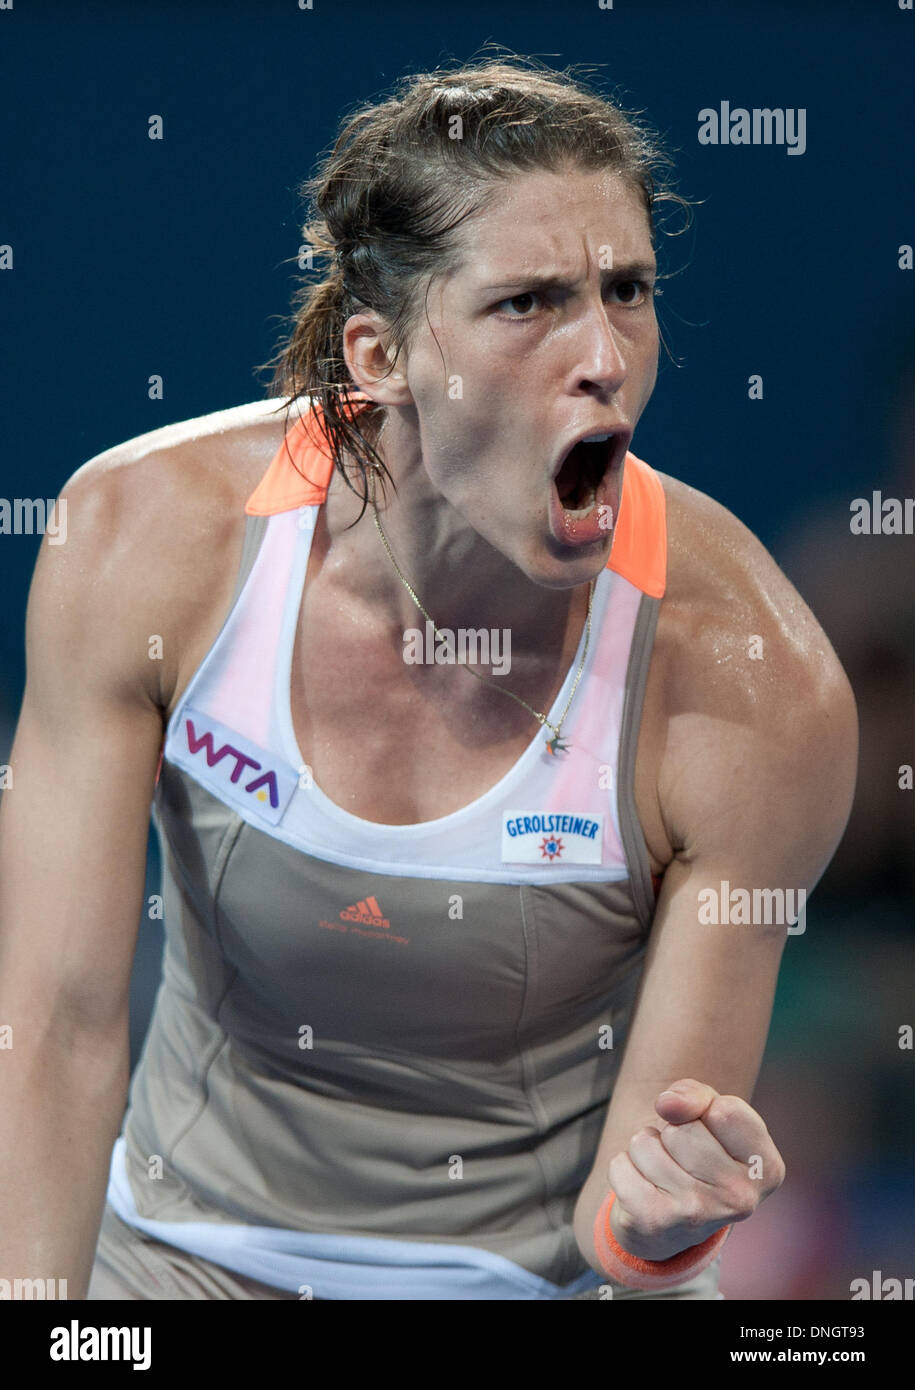 Brisbane, Australia. 29th Dec, 2013. Andrea Petkovic of Germany reacts during her women's singles first round match against Bethanie Mattek-Sands of the U.S. at Brisbane International Tennis Tournament in Brisbane, Australia, Dec. 29, 2013. Petkovic won 2-0. Credit:  Bai Xue/Xinhua/Alamy Live News Stock Photo